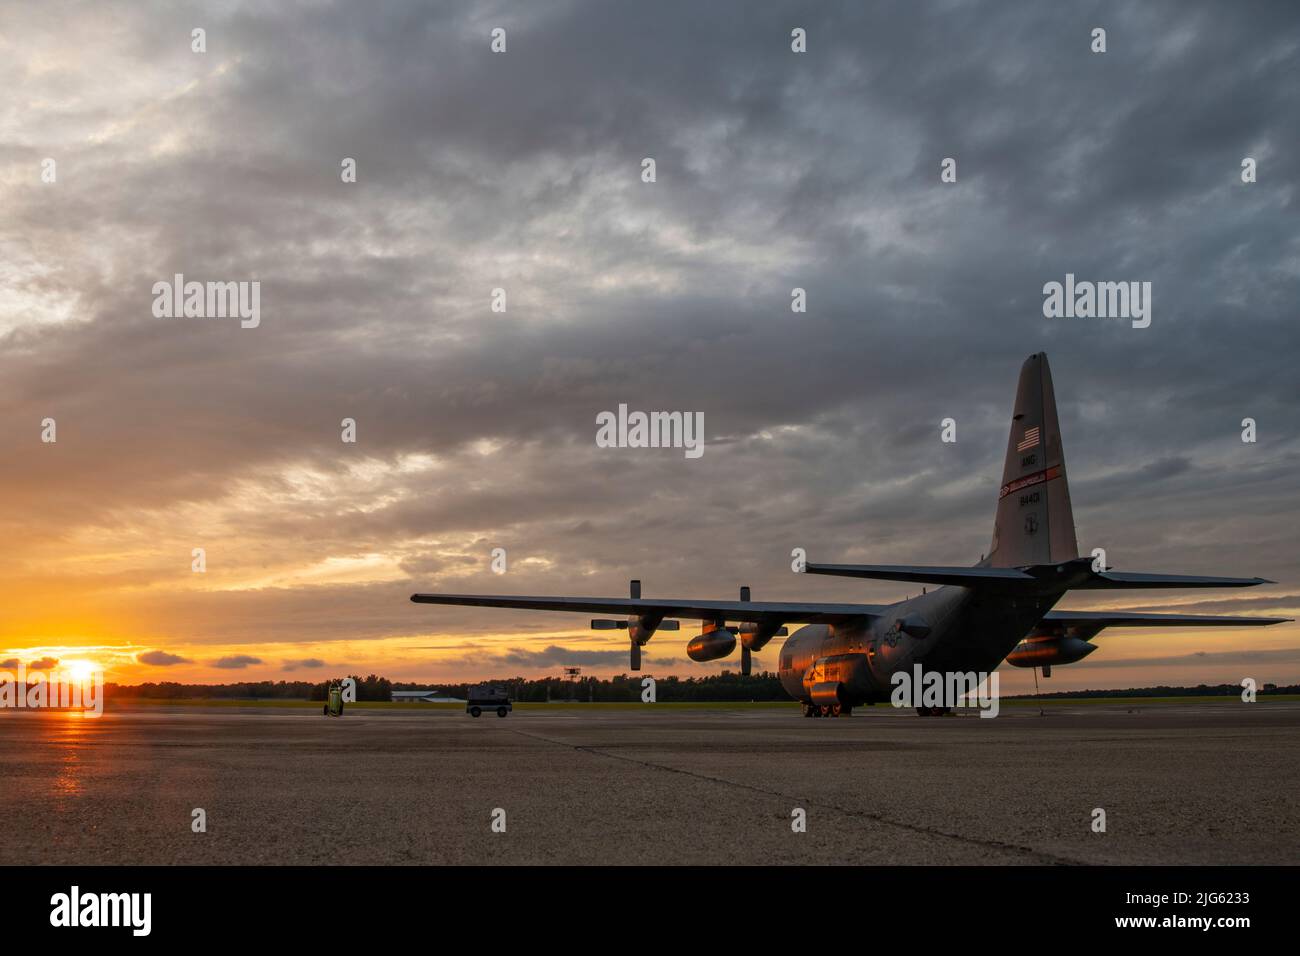 The sun sets on the final C-130H Hercules left at the 179th Airlift Wing at Mansfield Lahm ANGB, Ohio, July 6, 2022. This aircraft, tail 88-4401, will retire and become a static display at the MAPS Air Museum (Military Aviation Preservation Society), an internationally known museum of aviation in North Canton, Ohio. After being selected to become the nation's first Air National Guard Cyber Wing, the unit is transitioning from flying the C-130H Hercules to a new mission assigned to Air Combat Command. (U.S. Air National Guard photo by Master Sgt. Joe Harwood) Stock Photo